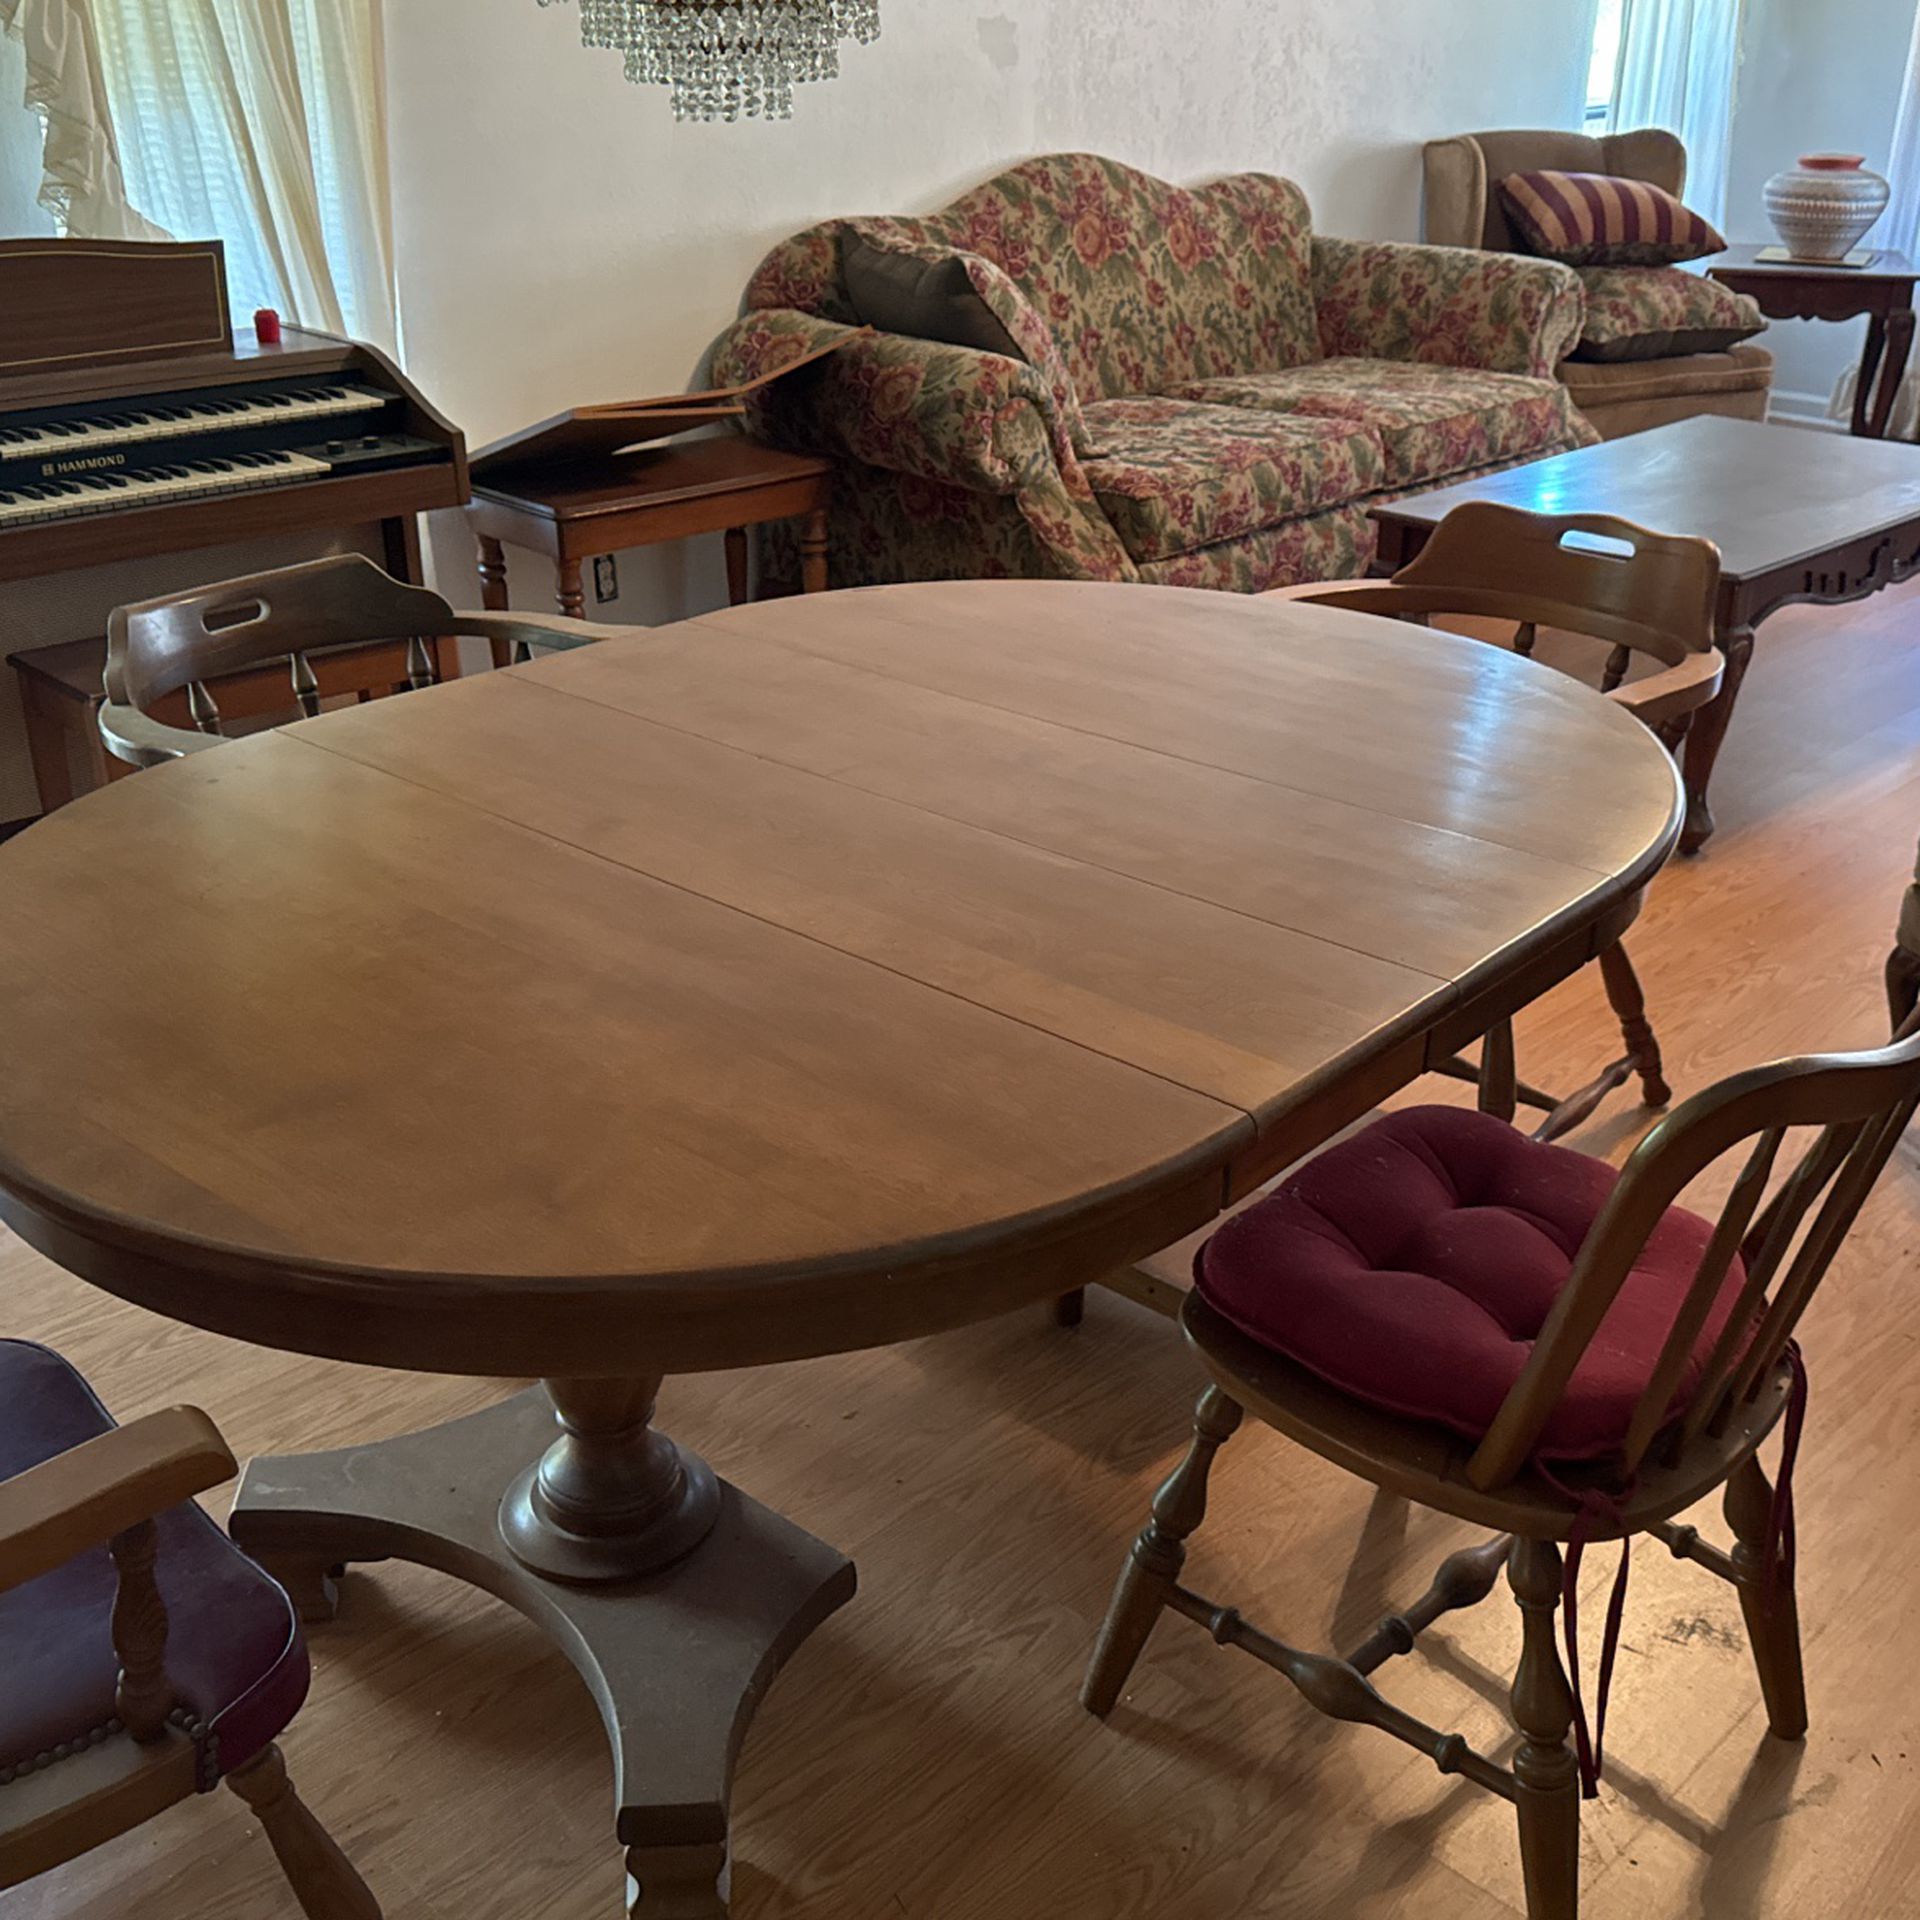 a Dining table Solid wood like new, no scratches, has a special cover. with 6 chairs